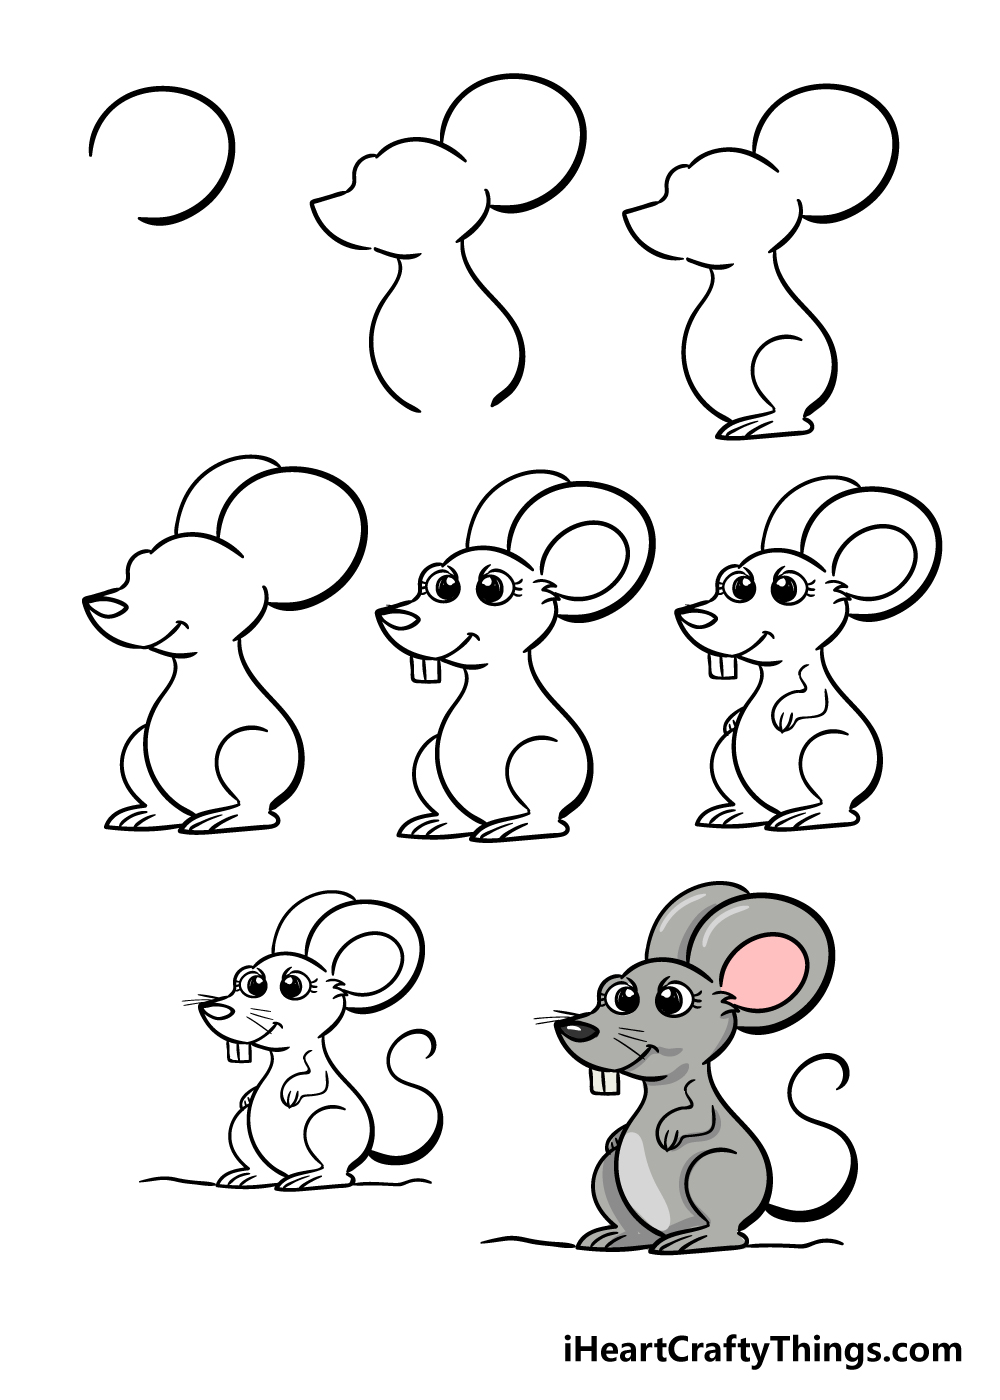 how to draw a mouse in 8 steps